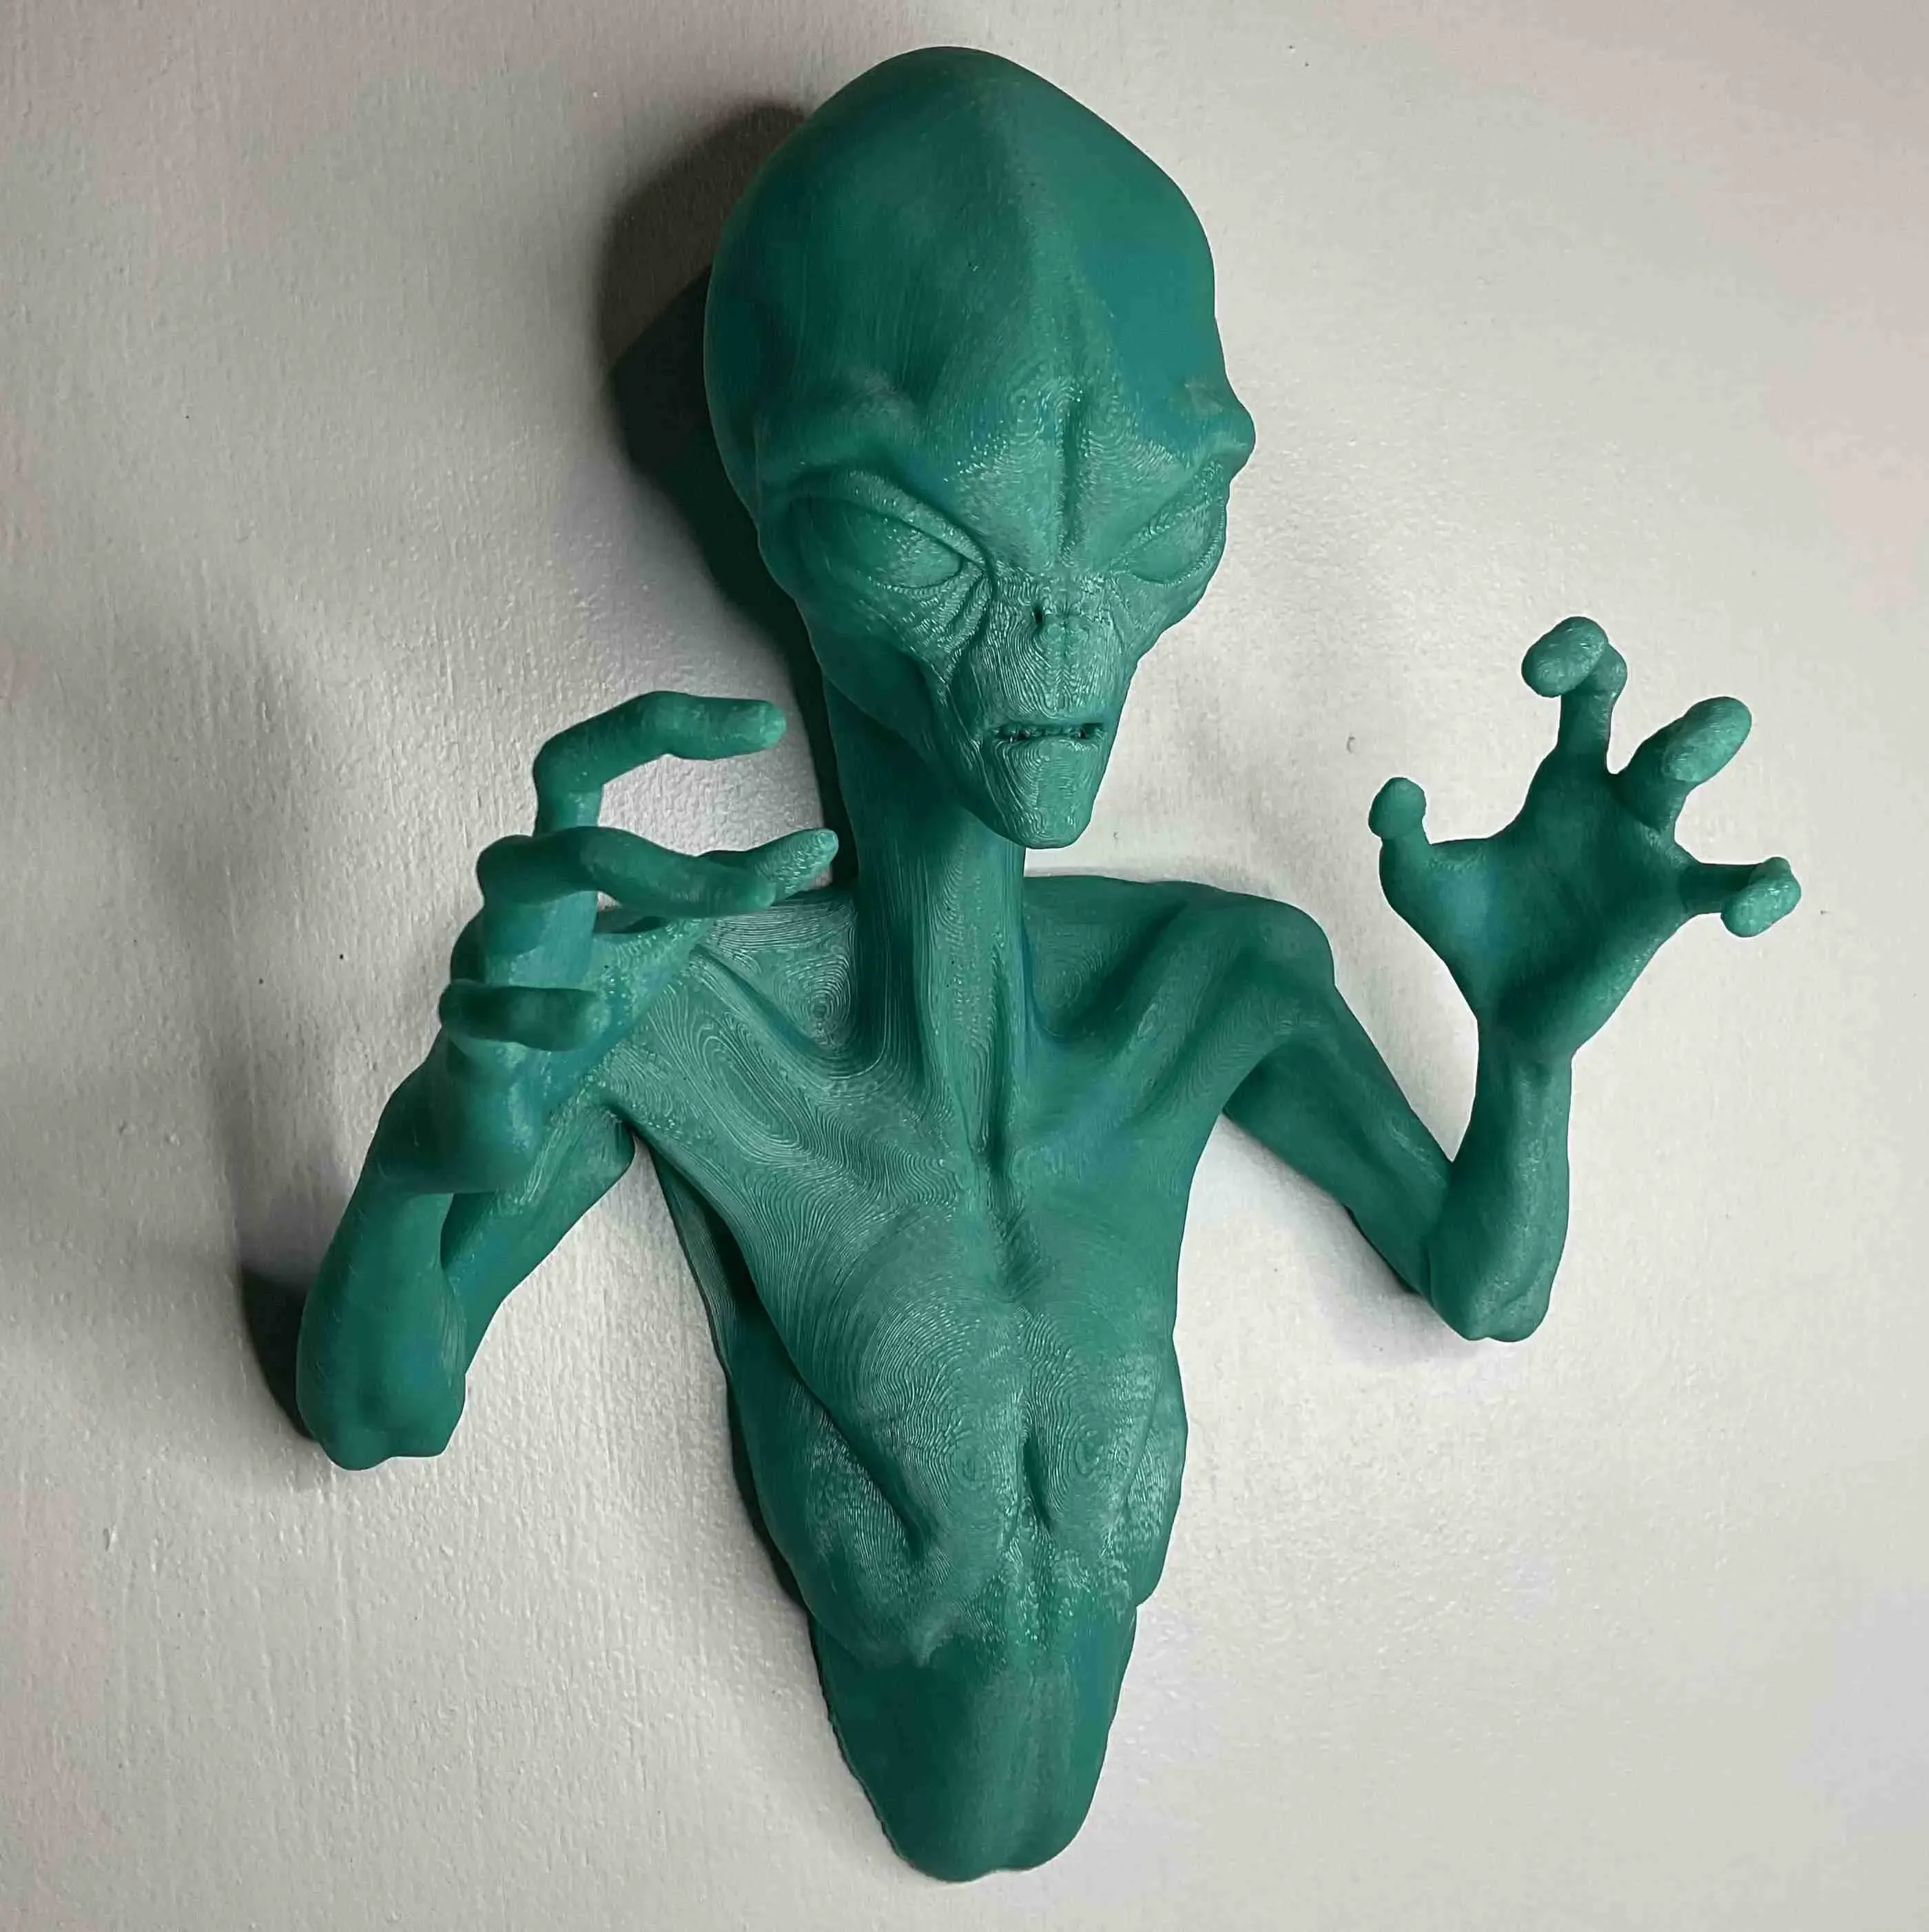 3D ALIEN WALL ART - PERFECT FOR HALLOWEEN! - *SUPPORT FREE*